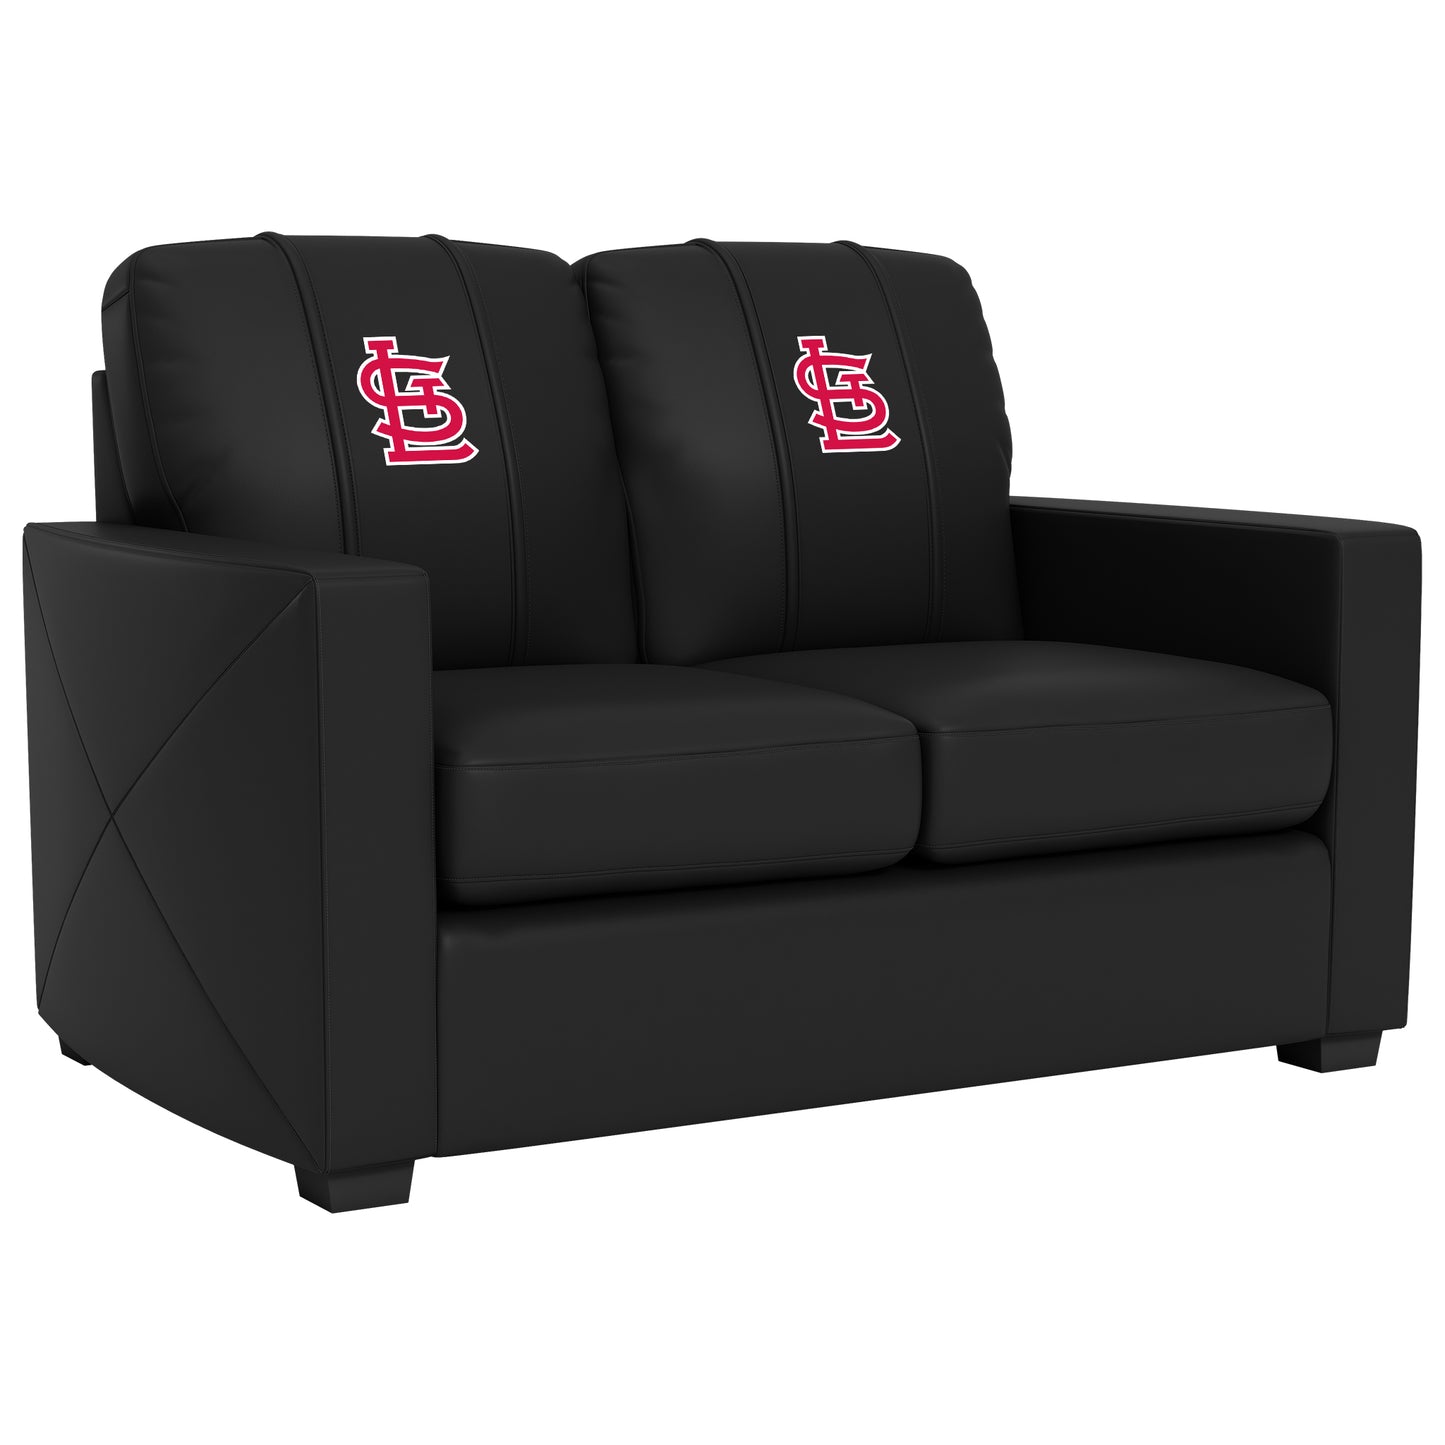 Silver Loveseat with St Louis Cardinals Secondary